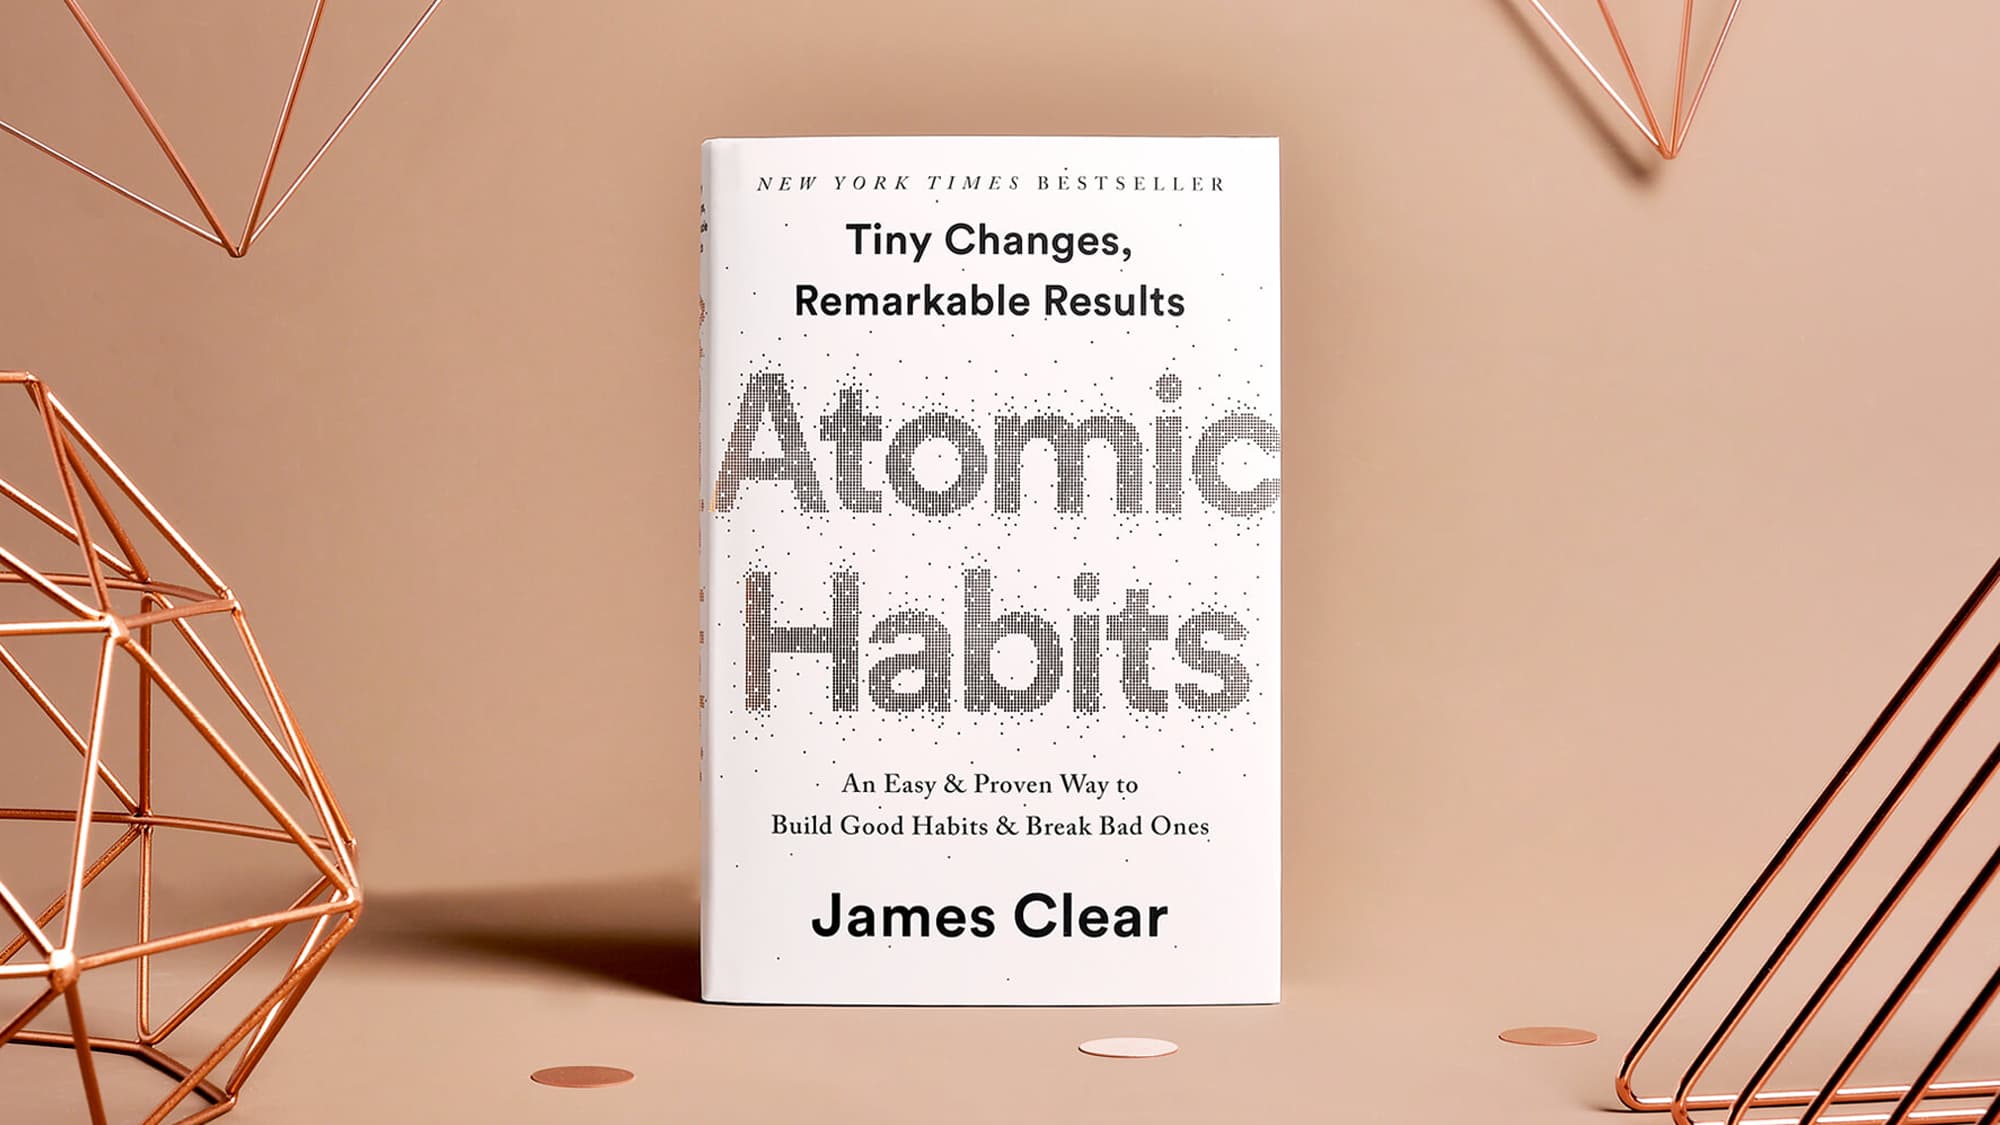 5 Key Lessons from Atomic Habits